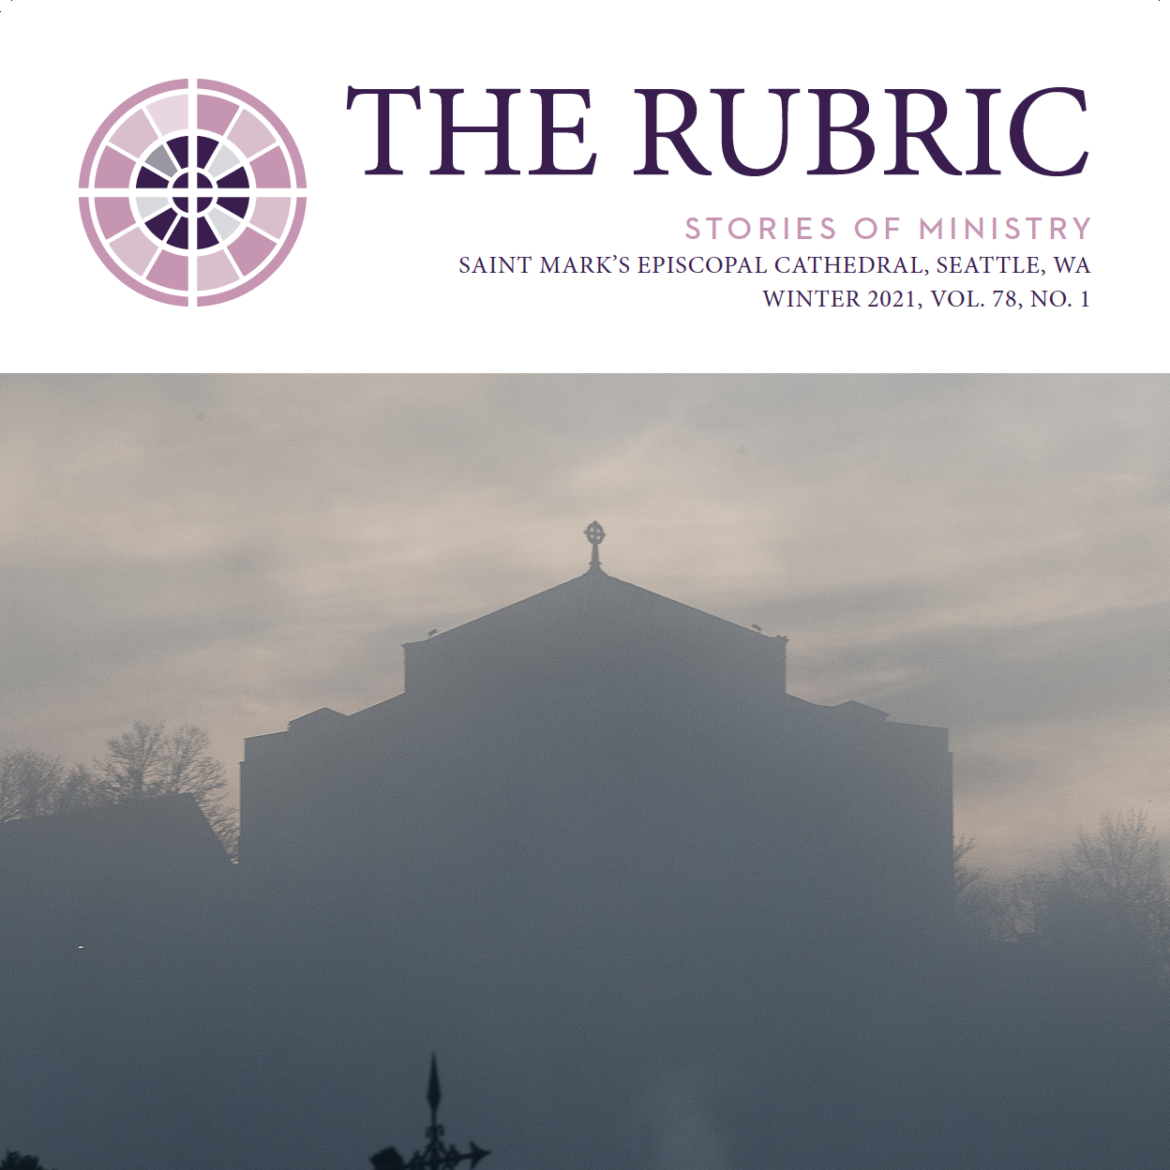 The Rubric: Winter 2021 Issue